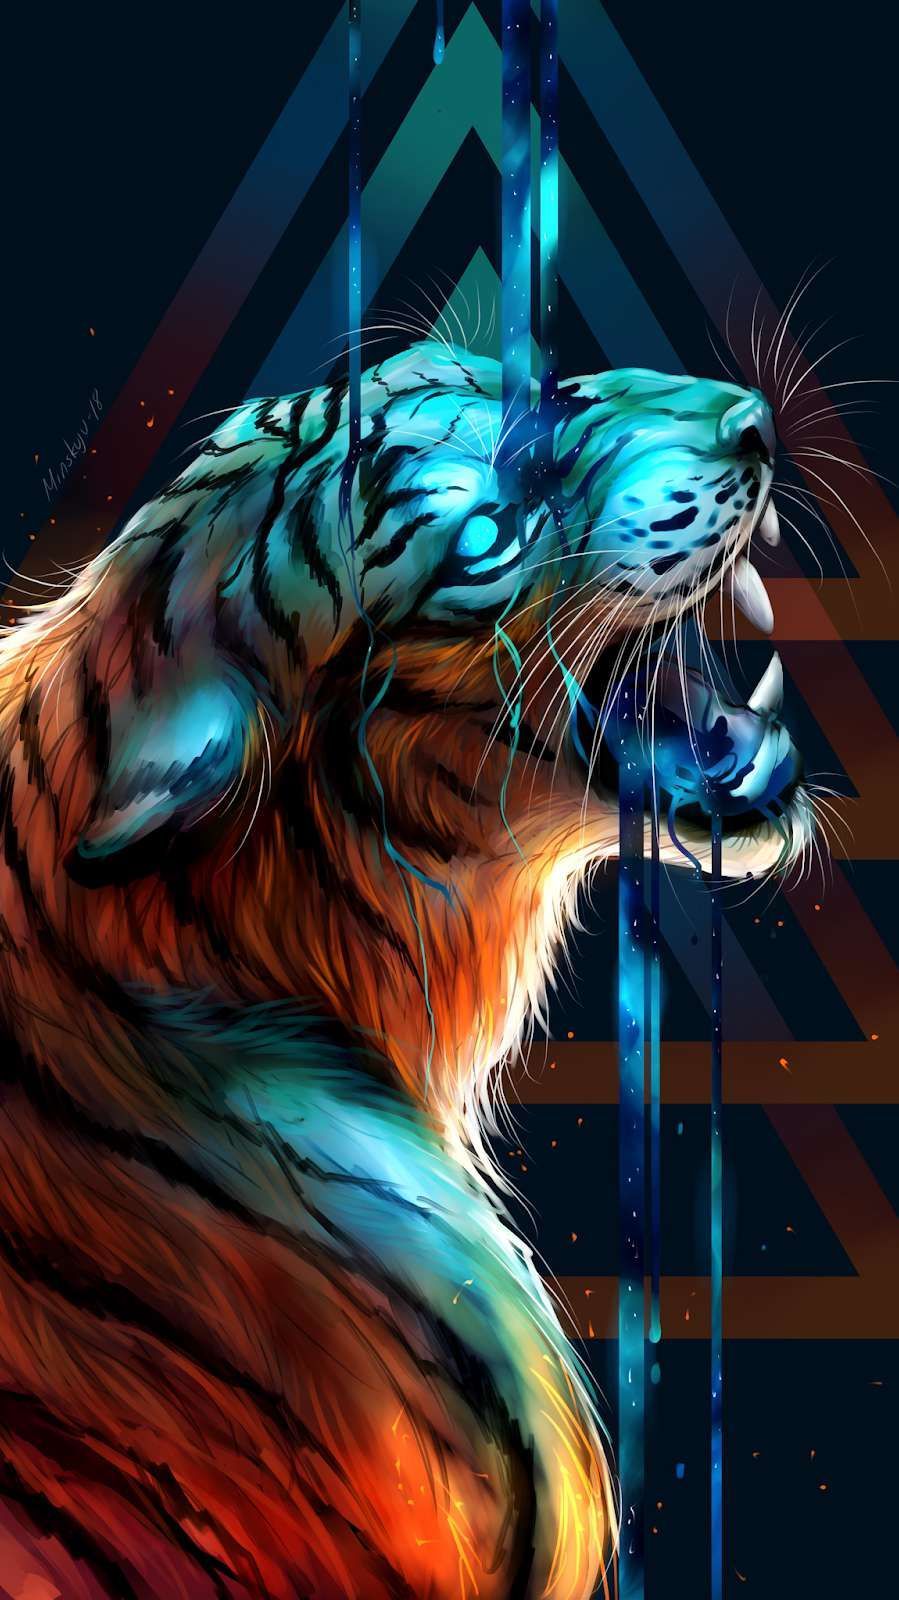 tigers wallpapers 3d